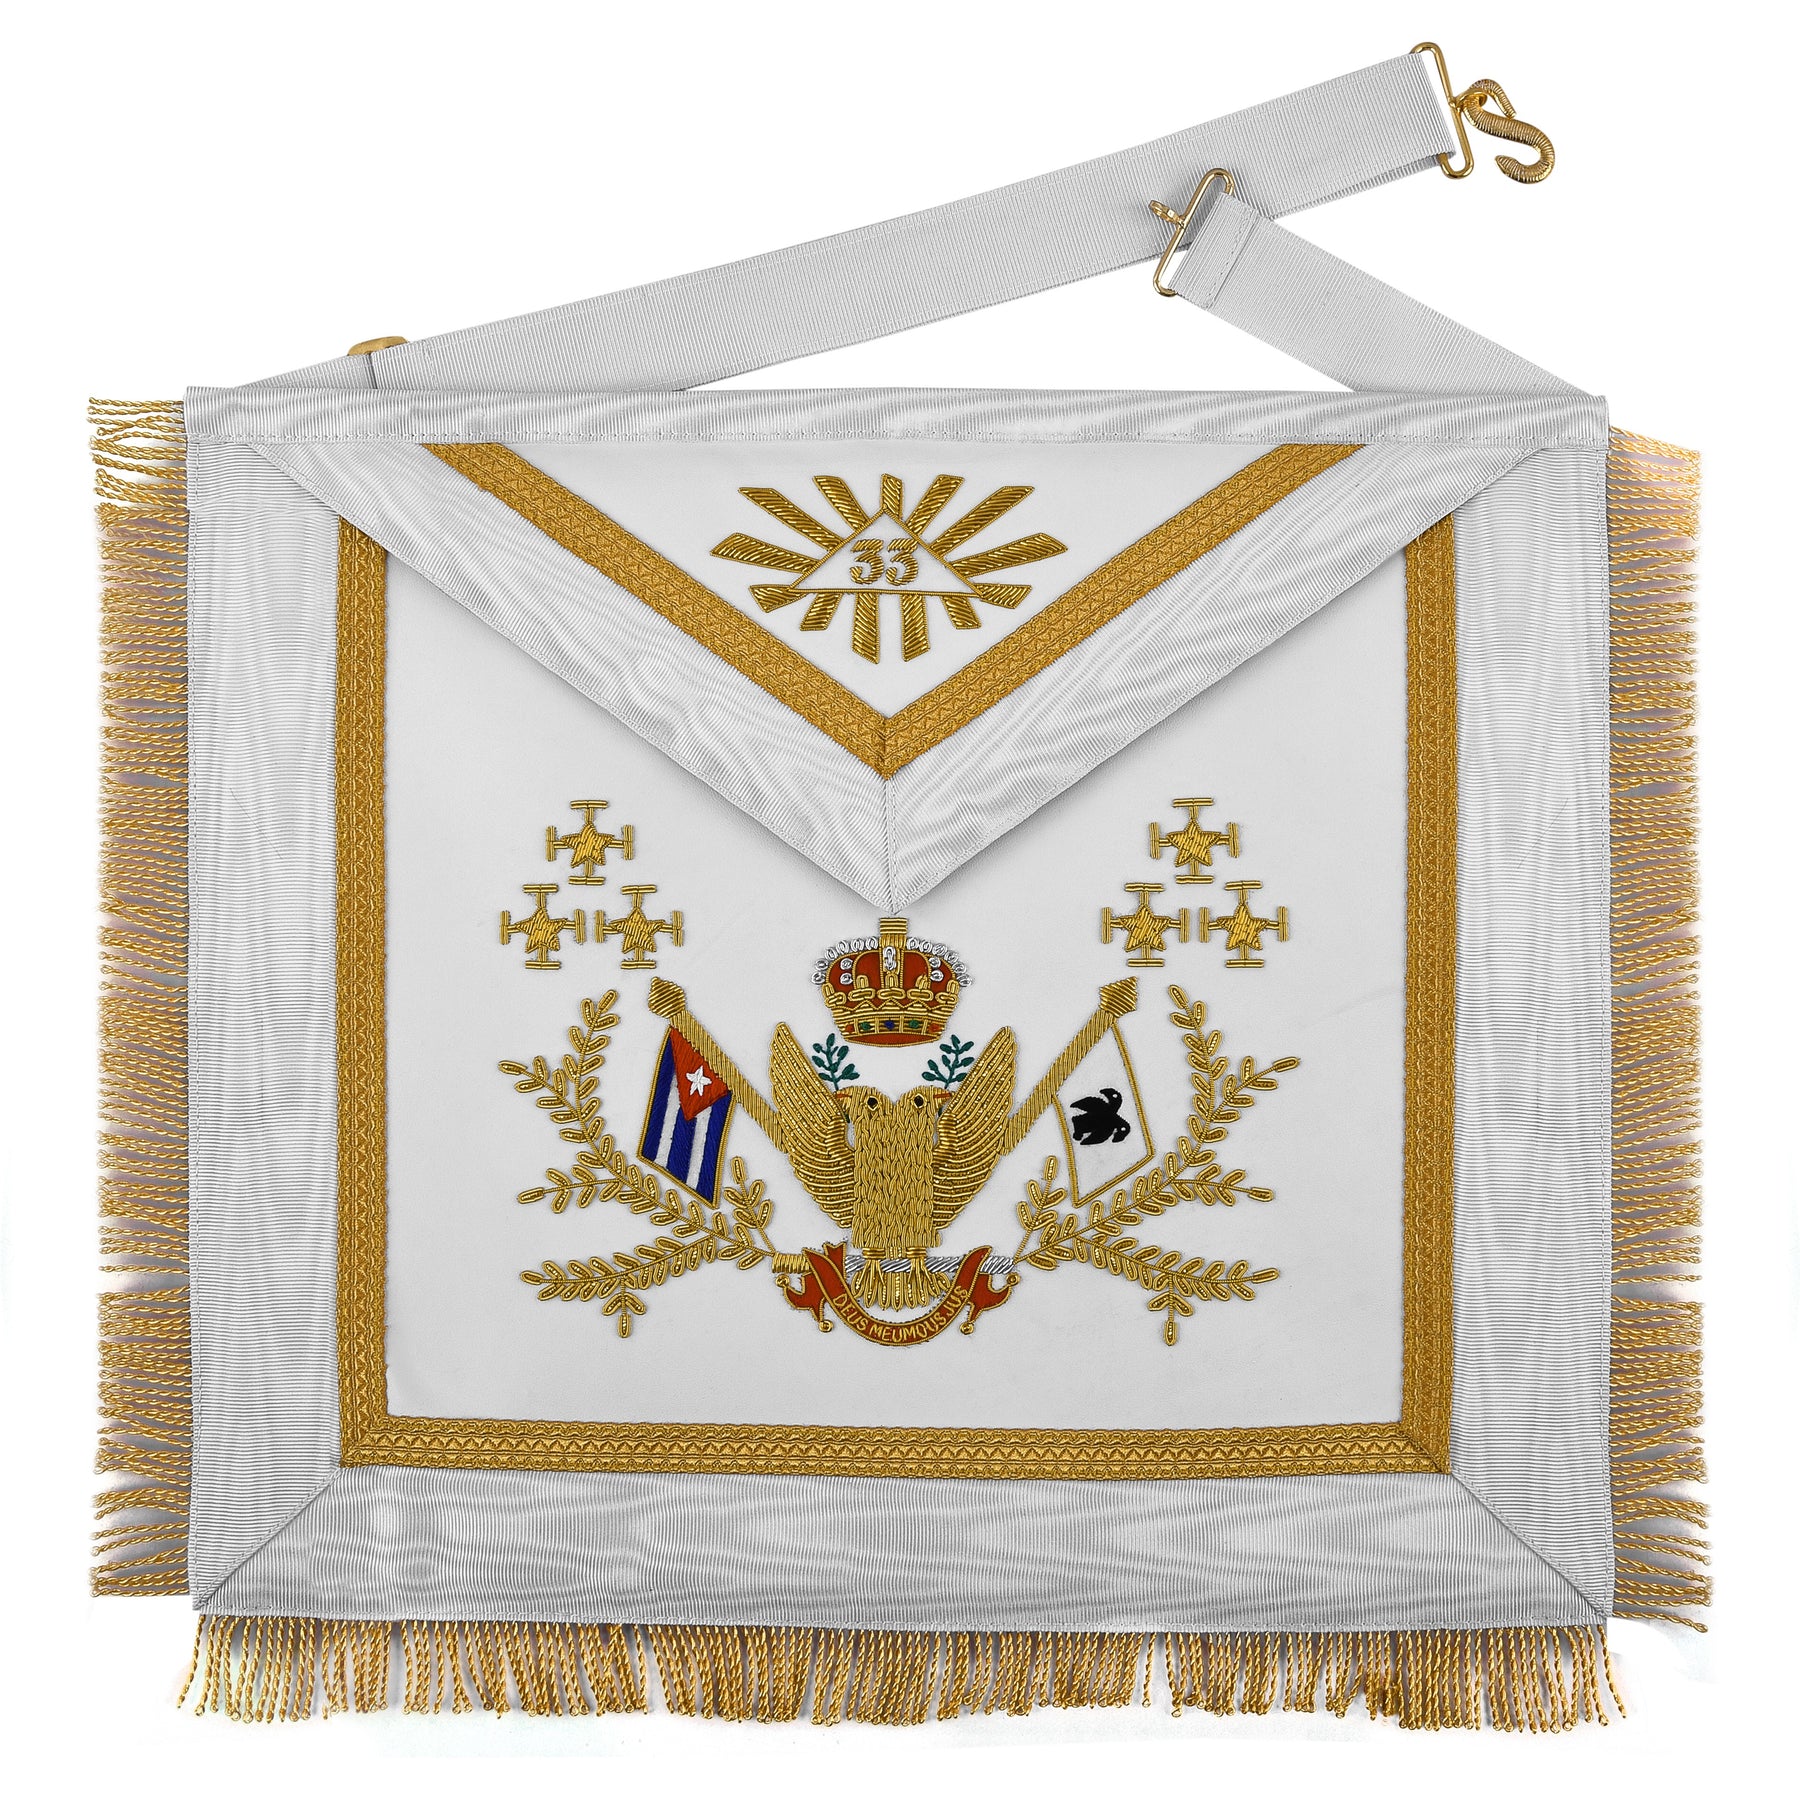 33rd Degree Scottish Rite Apron - Hand Embroidery Gold Bullion Wings Up ALL COUNTRIES FLAGS - Bricks Masons